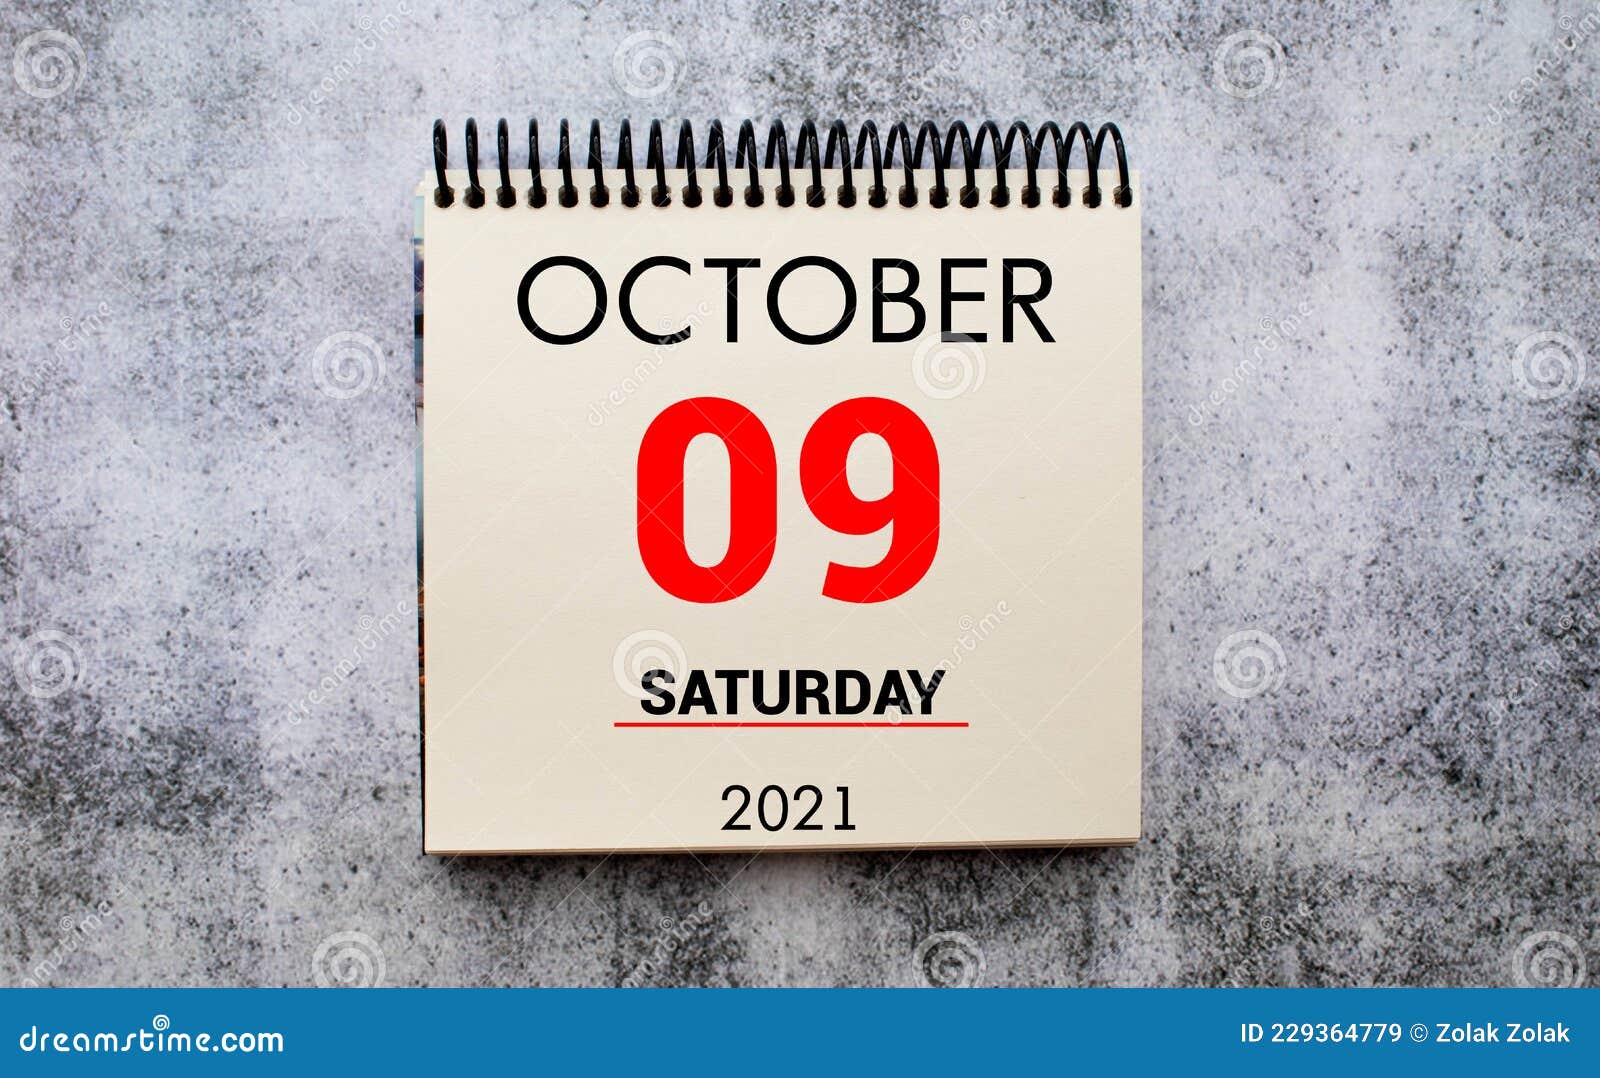 Wall Calendar With A Red Pin October 09 Stock Illustration